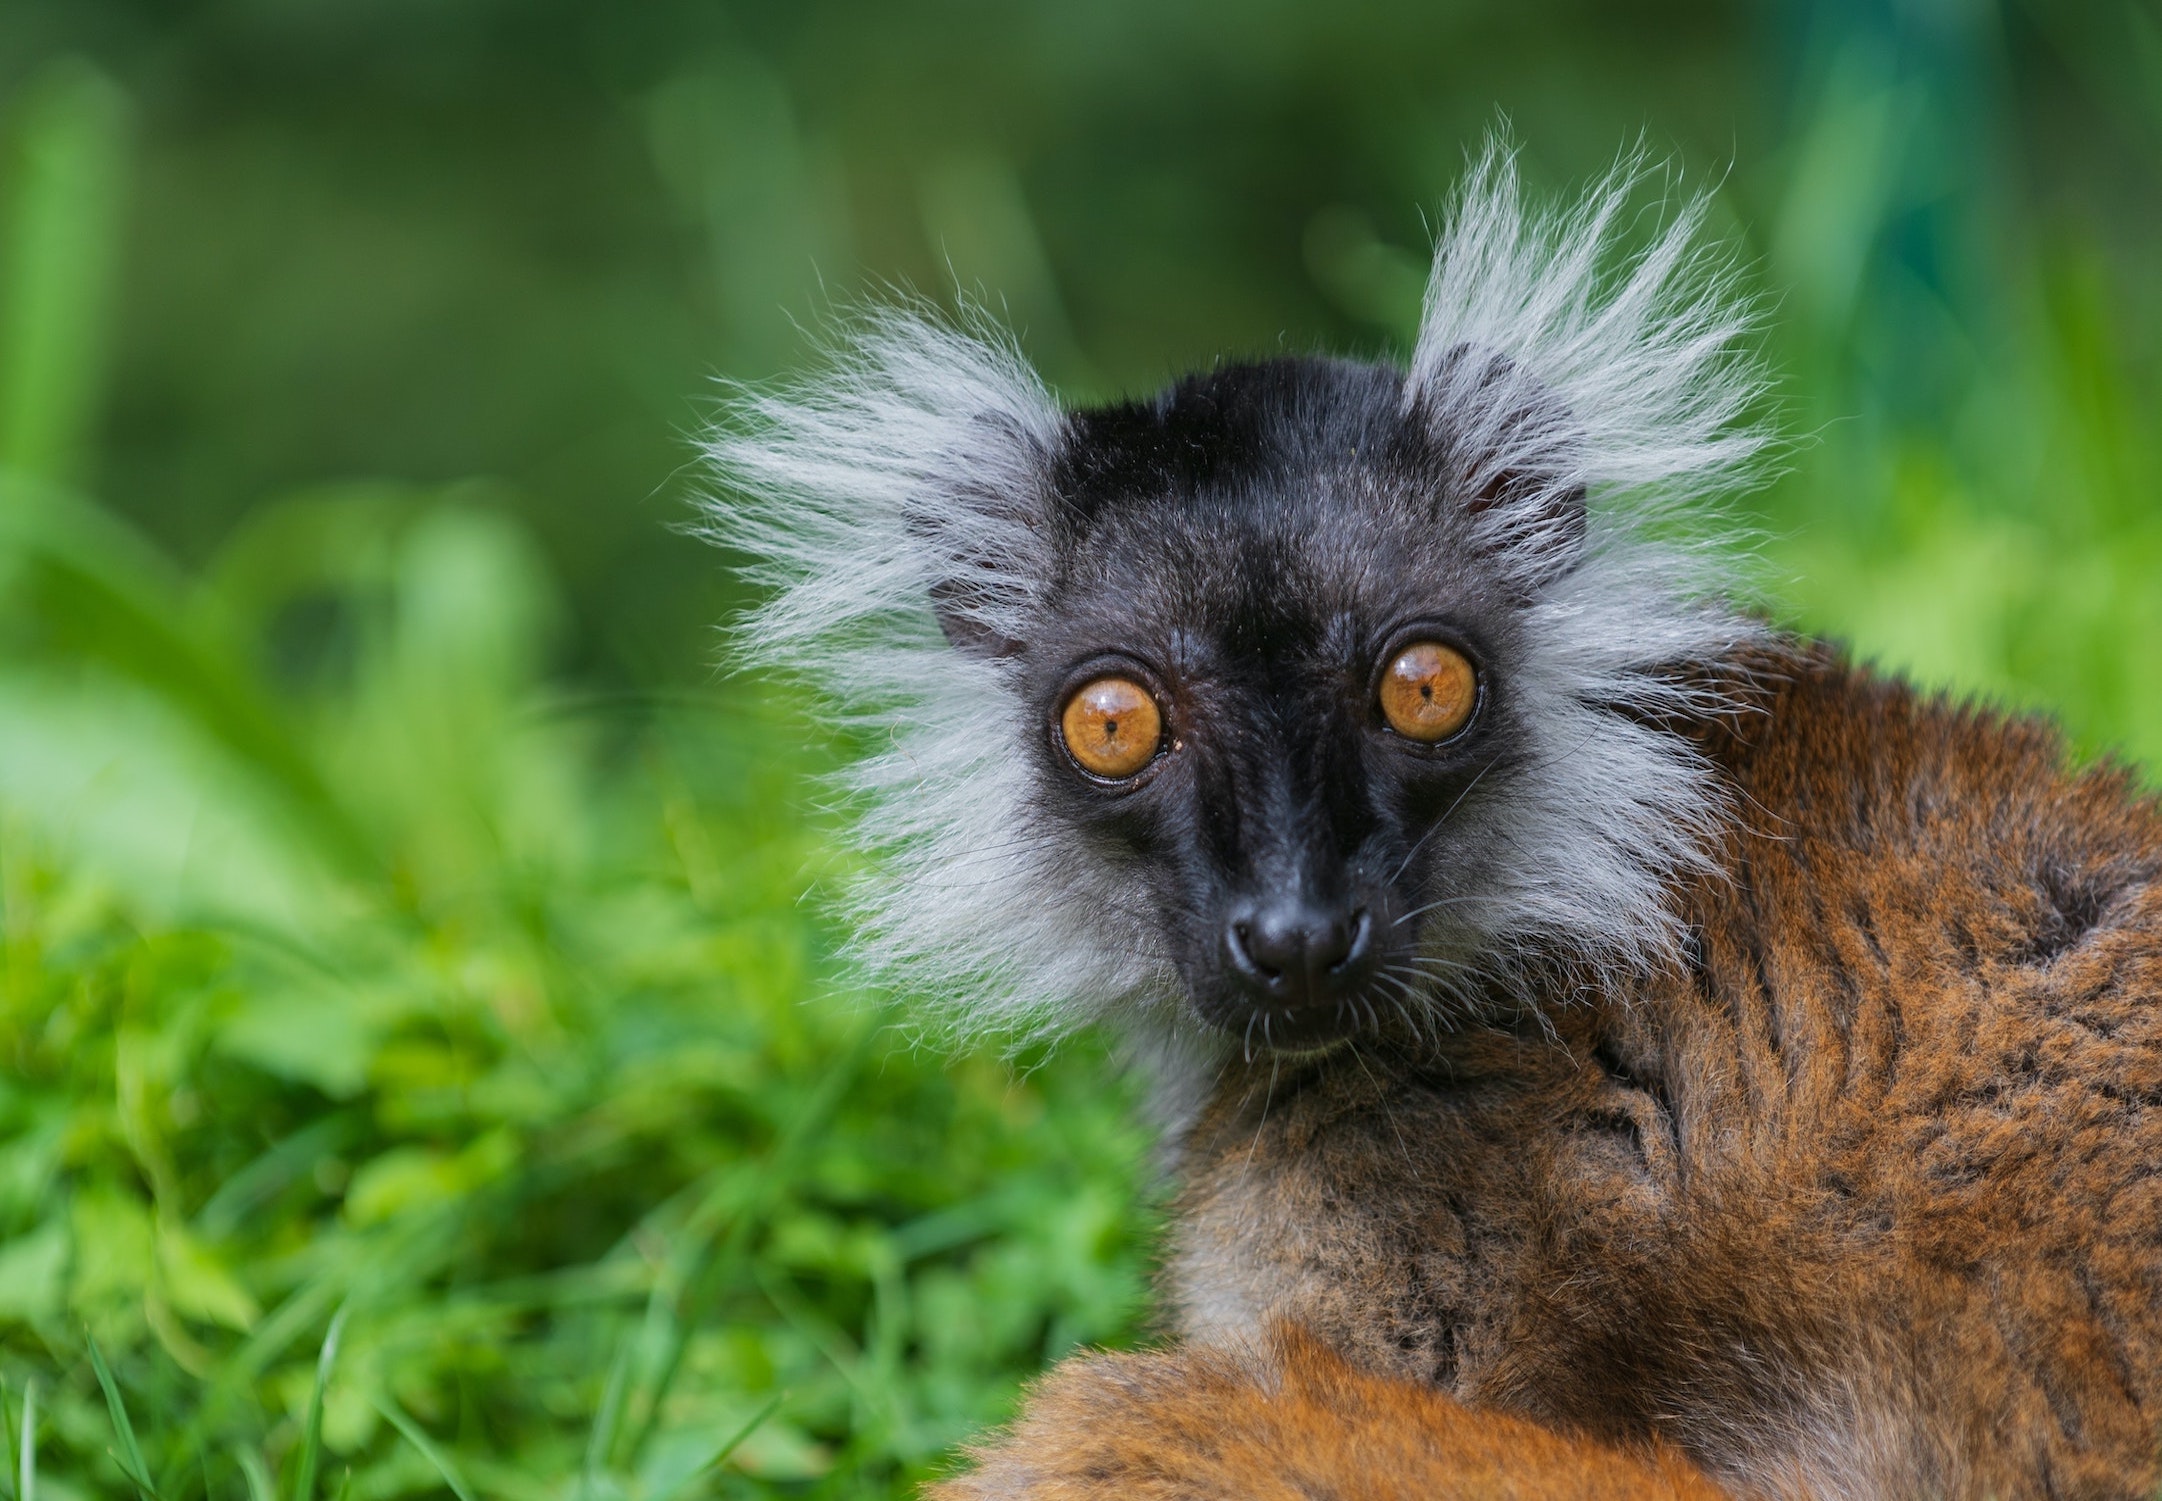 Image of a brown and black lemur's face